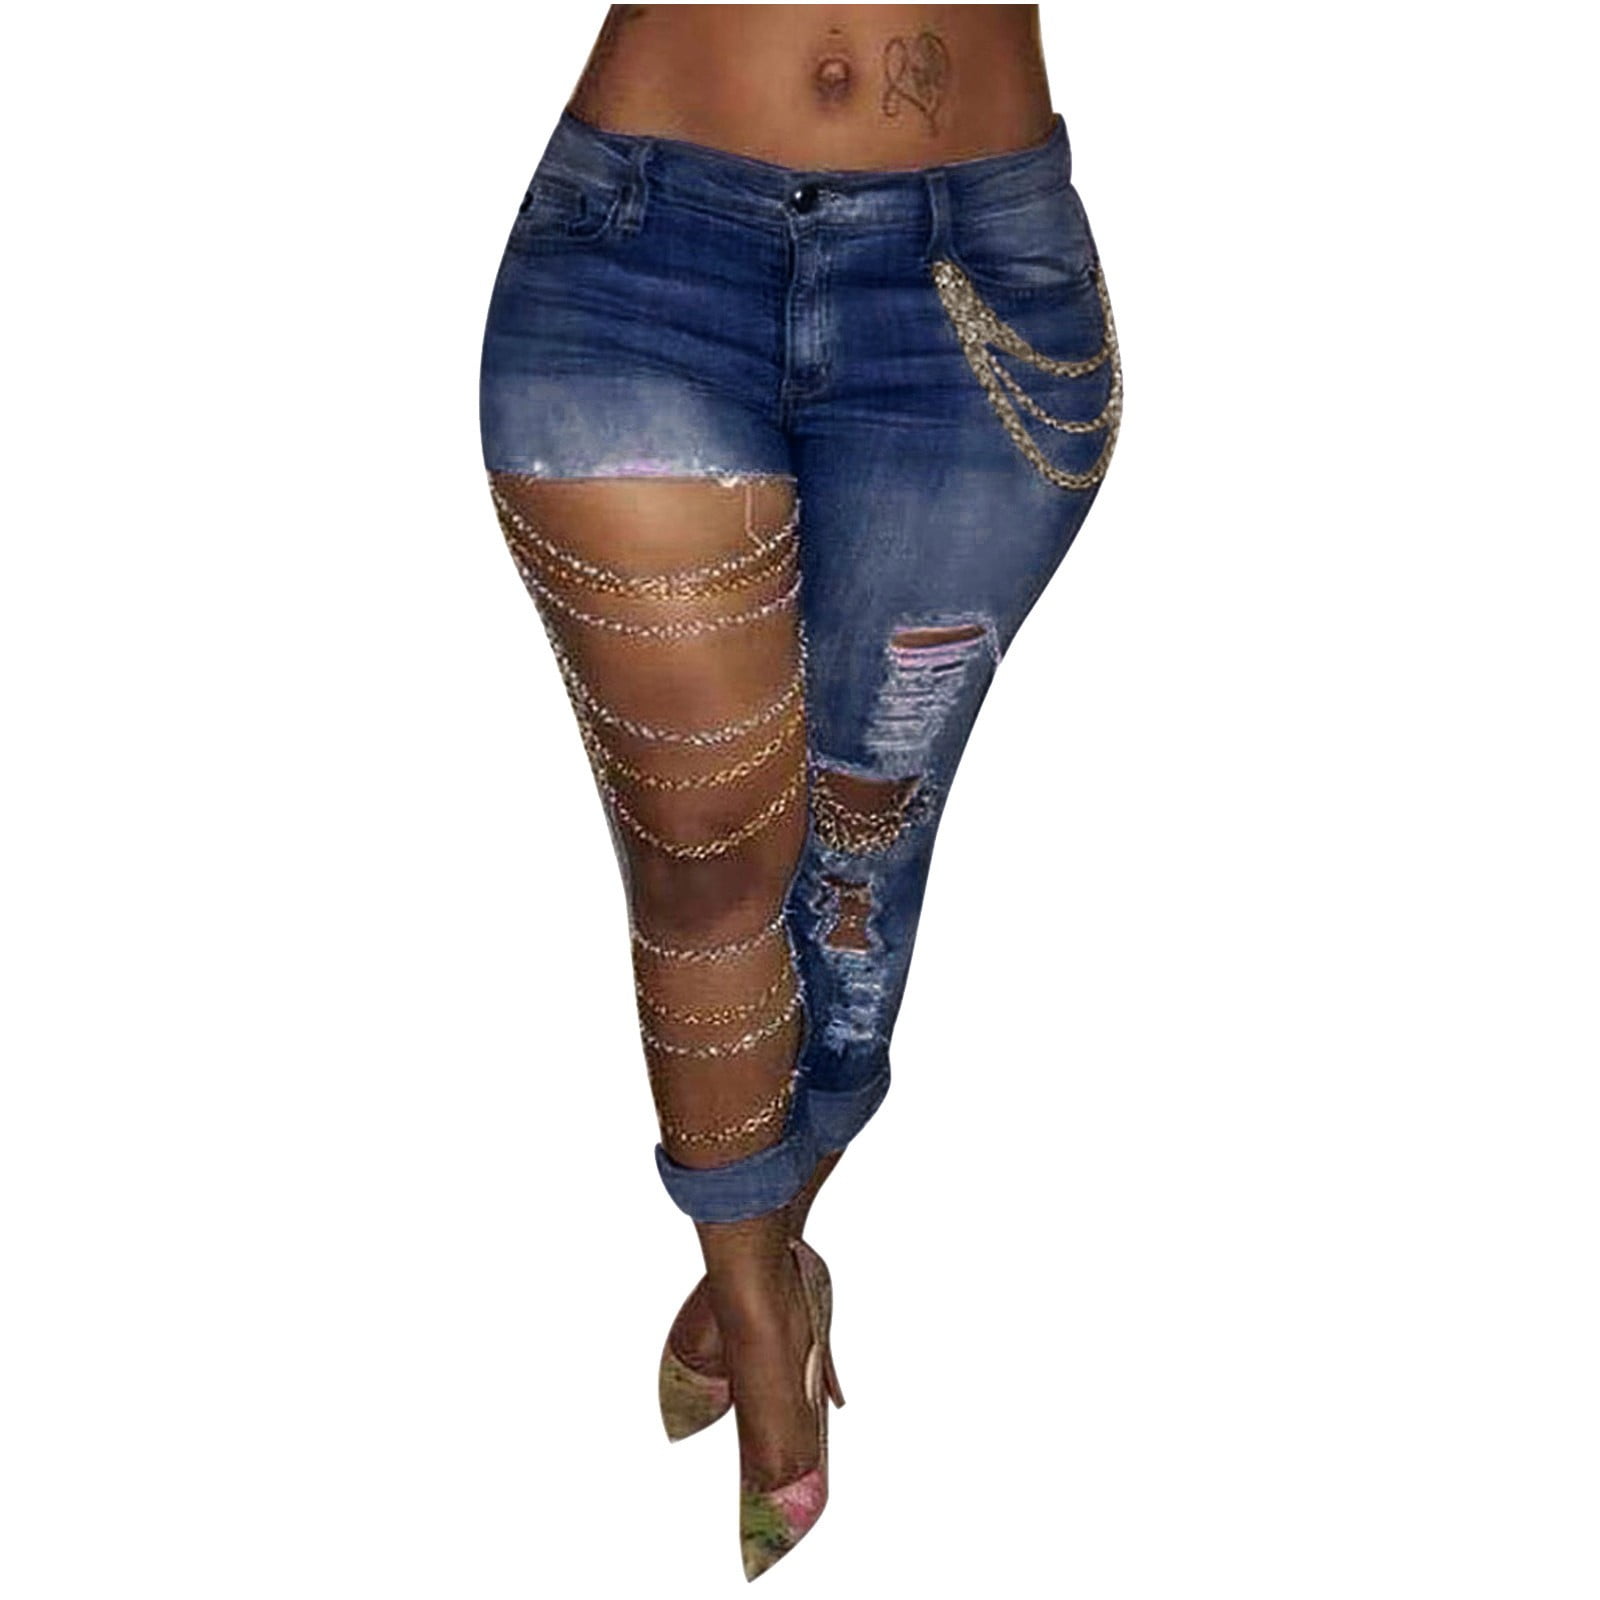 Guieoi Skinny Jeans Plus Size Jeans Women Solid Denim Ripped Chain Big Hole Jeans Trousers Pencil Pants - Walmart.com